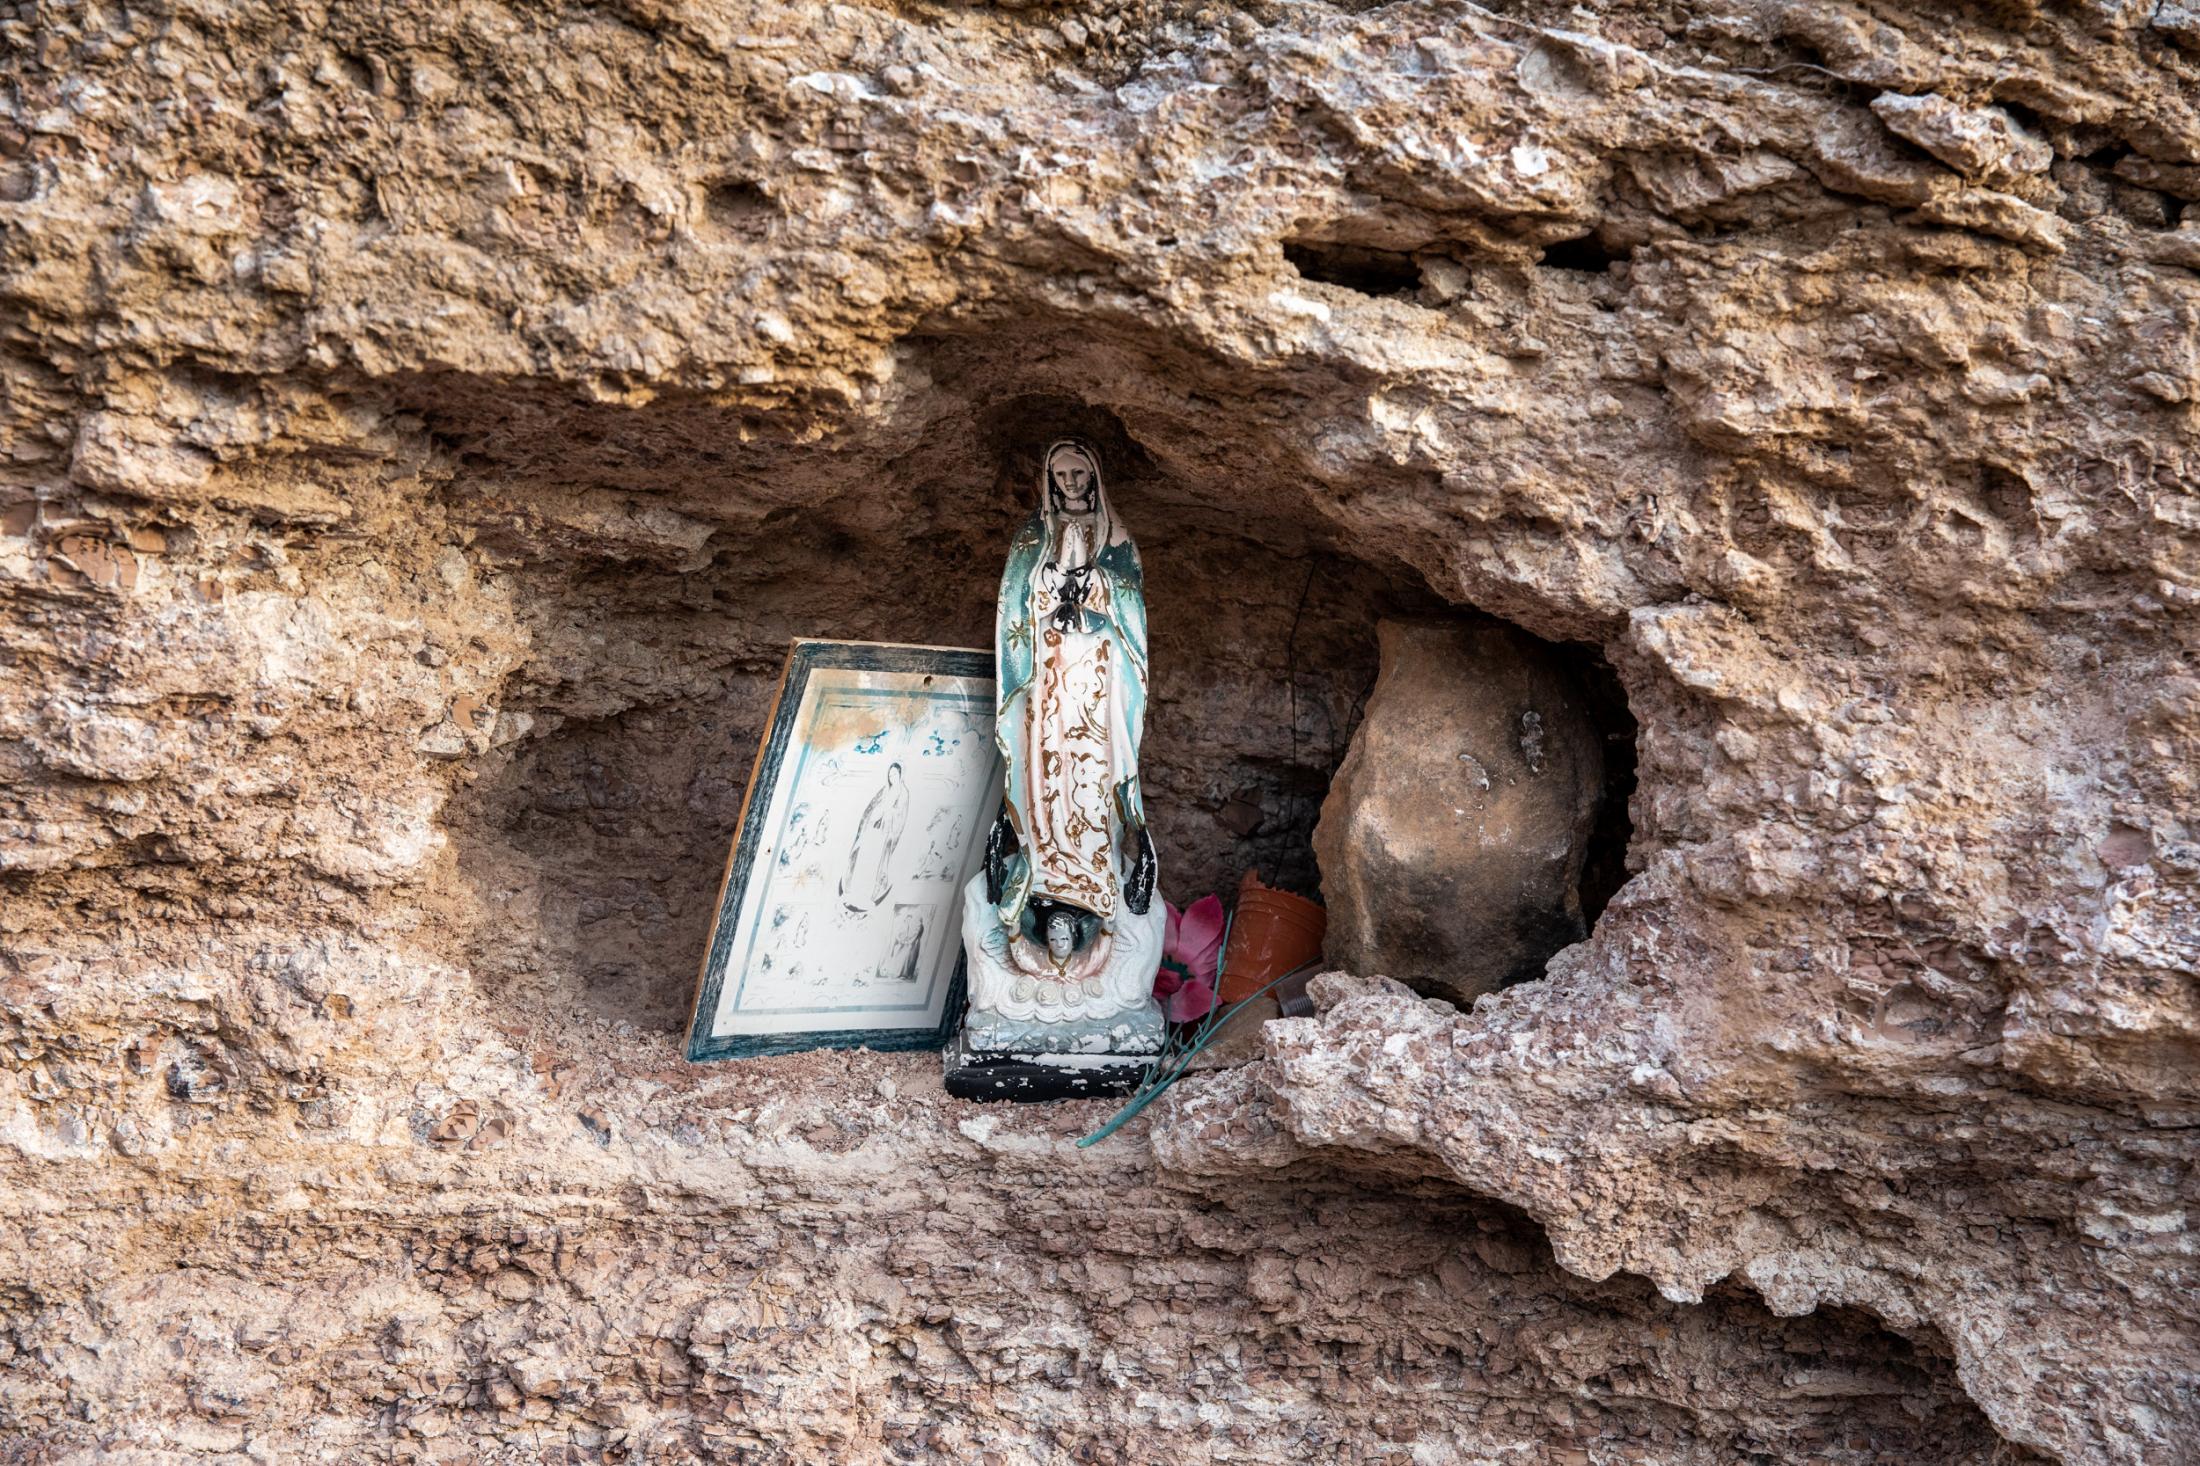 Until We Are Gone - Baja California -  Ornaments are placed in a rock crack in the mountain...